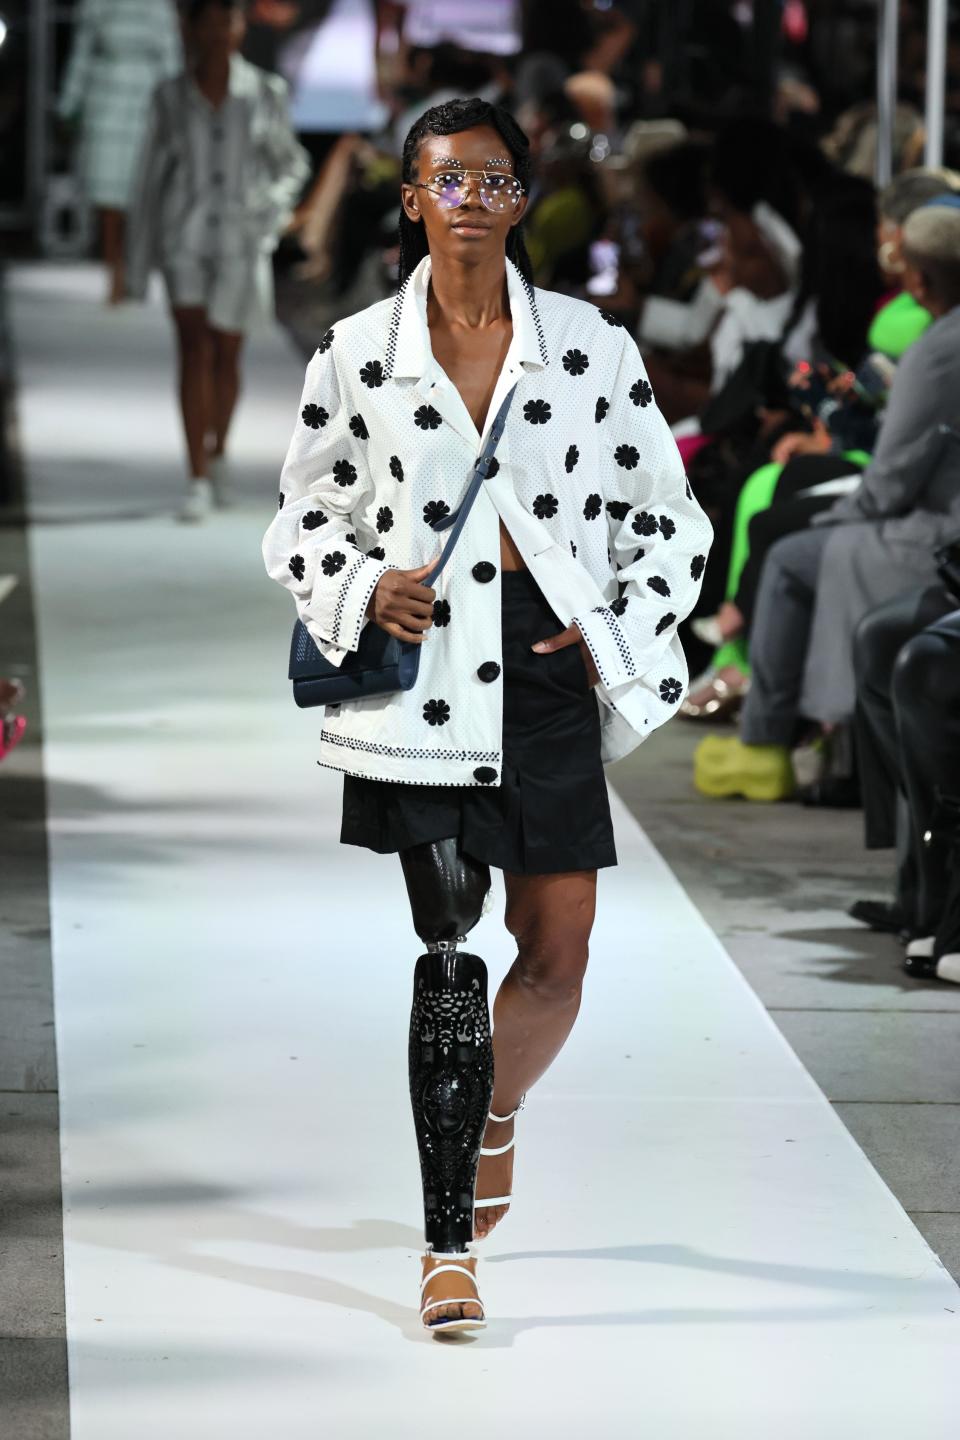 A model walks the runway for Johnathan Hayden during Harlem's Fashion Row 15th Anniversary Fashion Show And Style Awards on Sept. 6, 2022, in New York City.